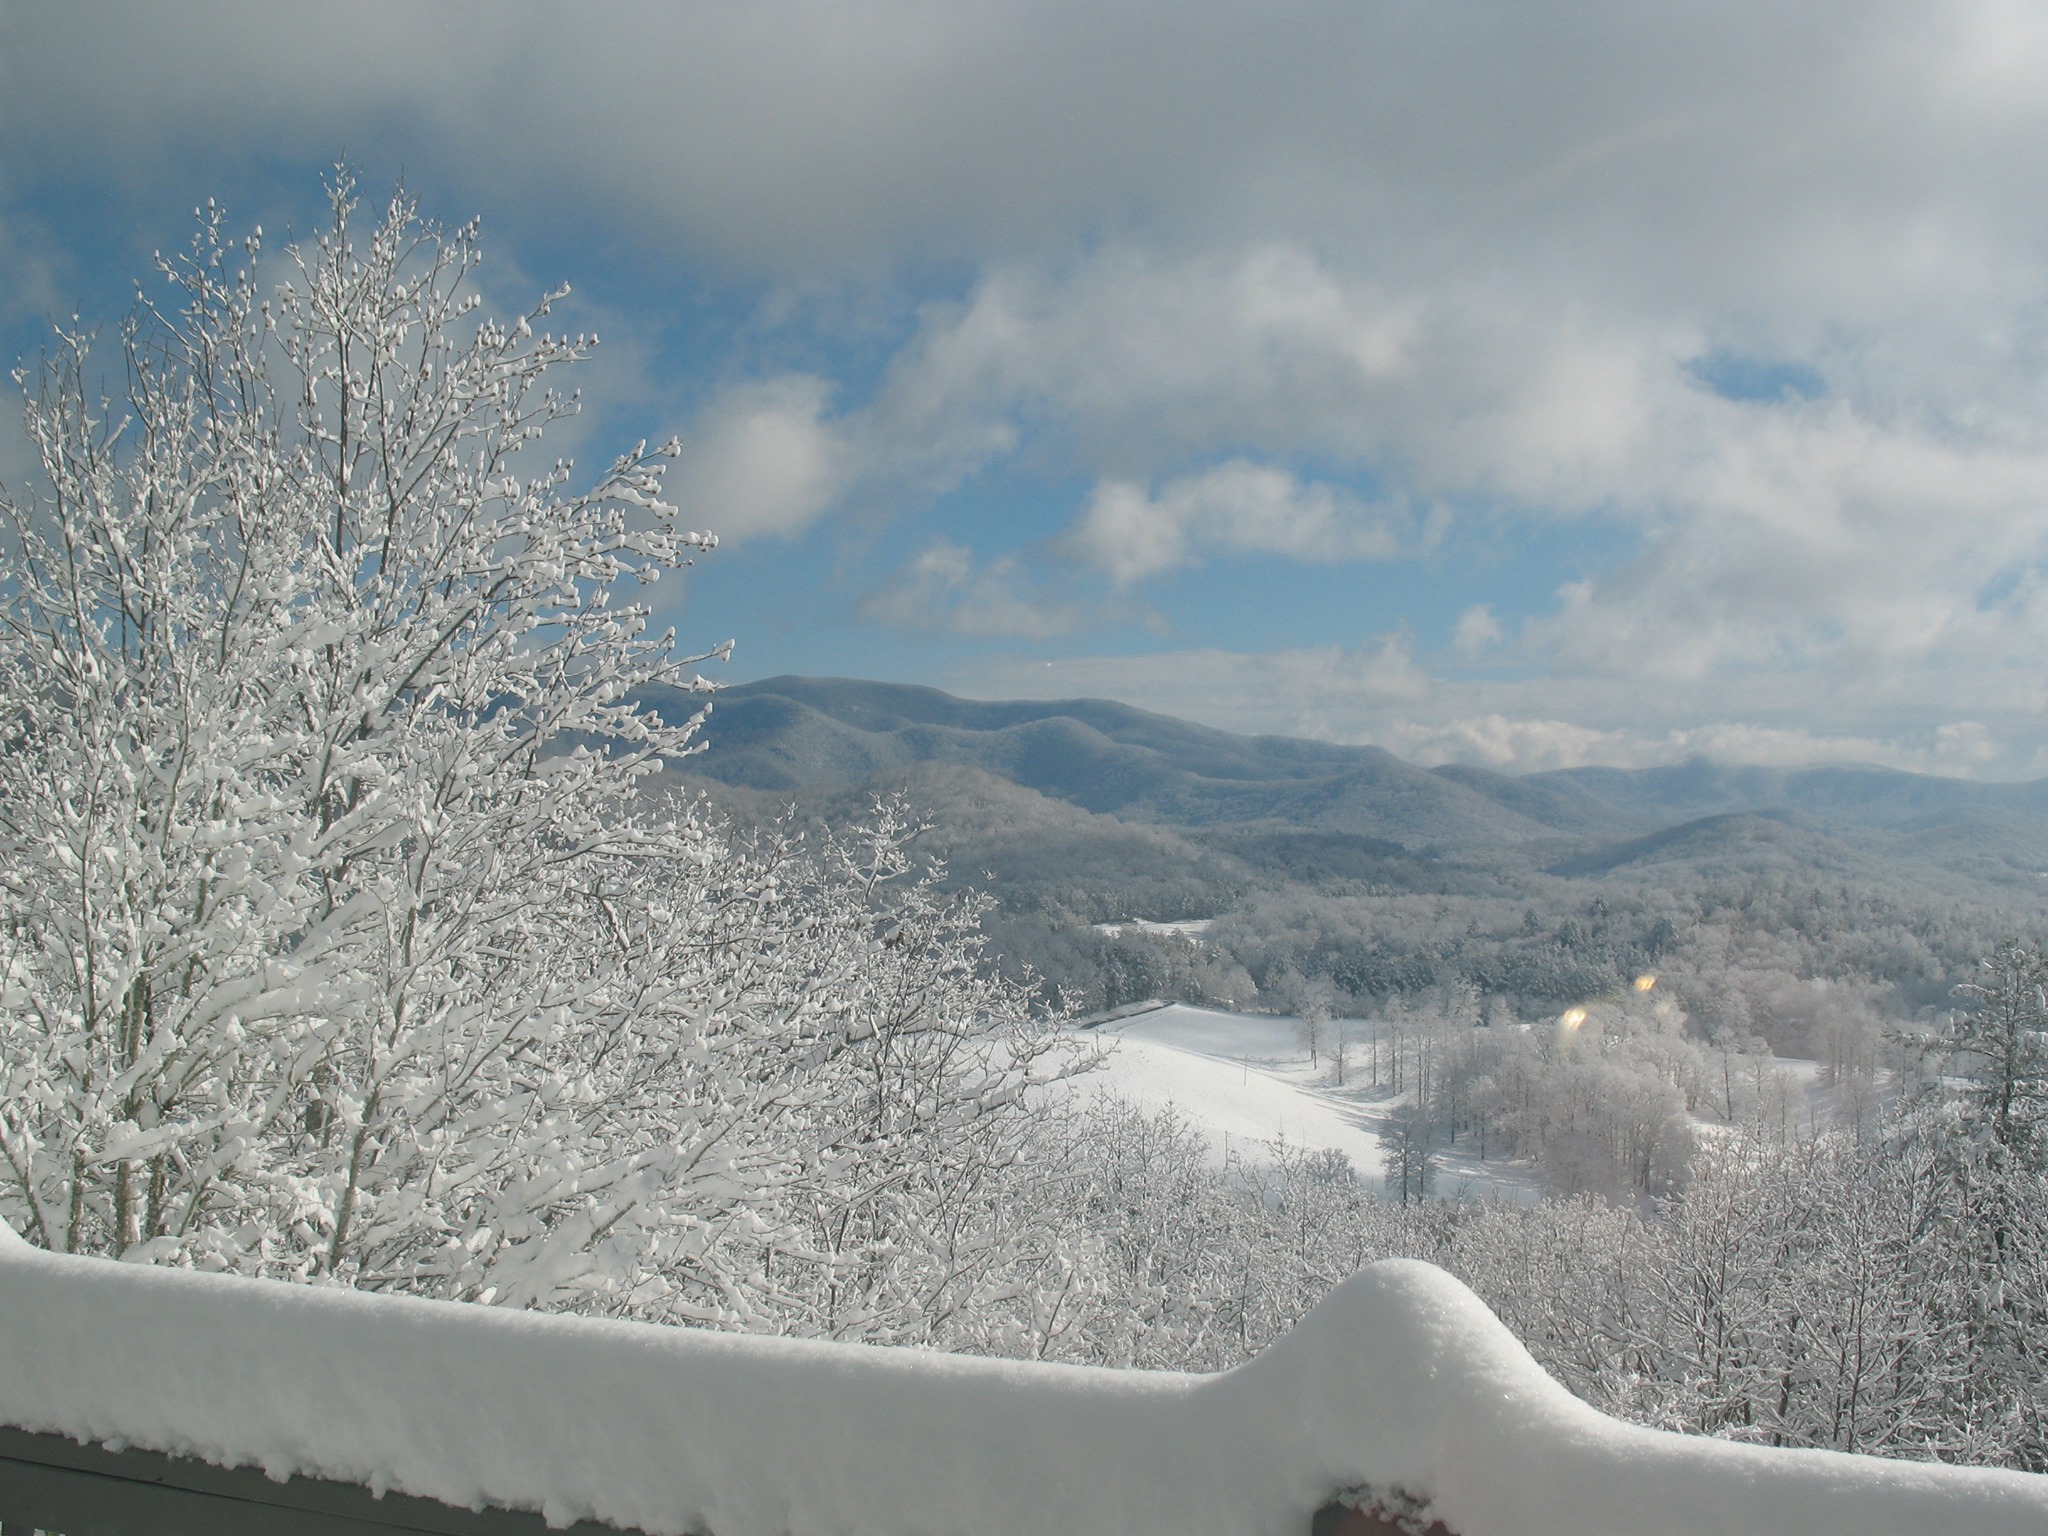 Winter Staycation or Valentine's Day Getaway - Winter is a great time to be in Blairsville!